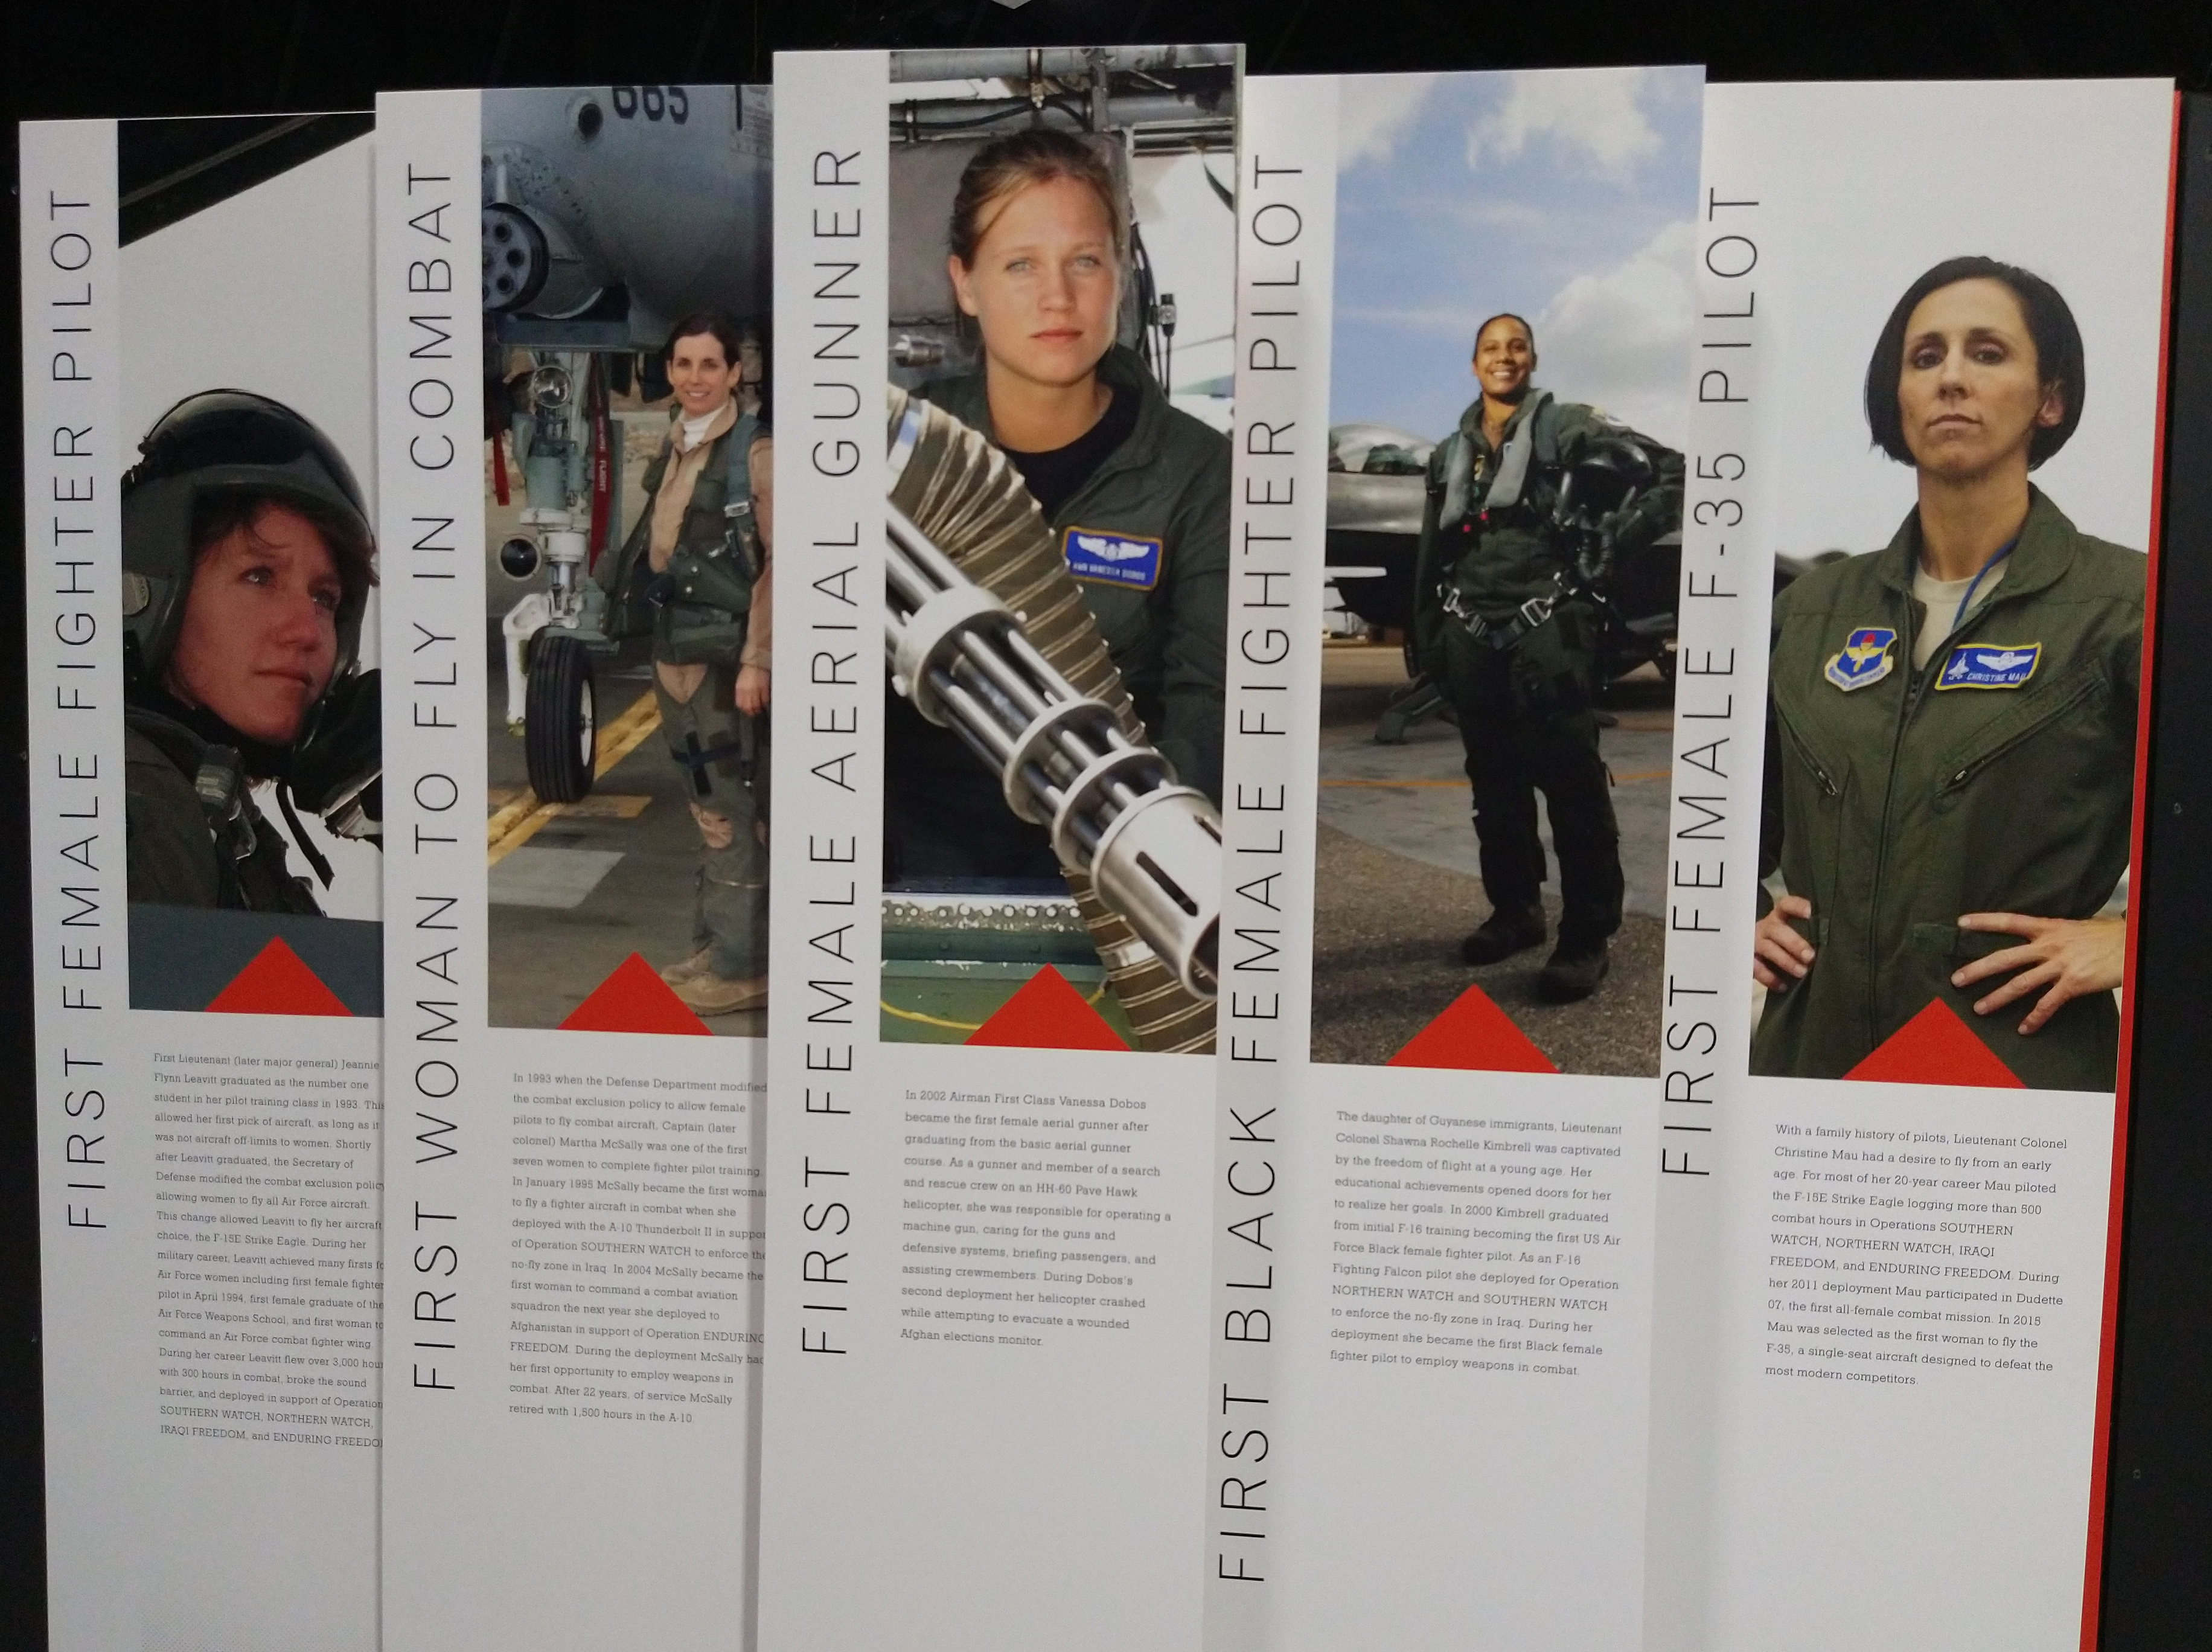 Picture of the Women in Combat display